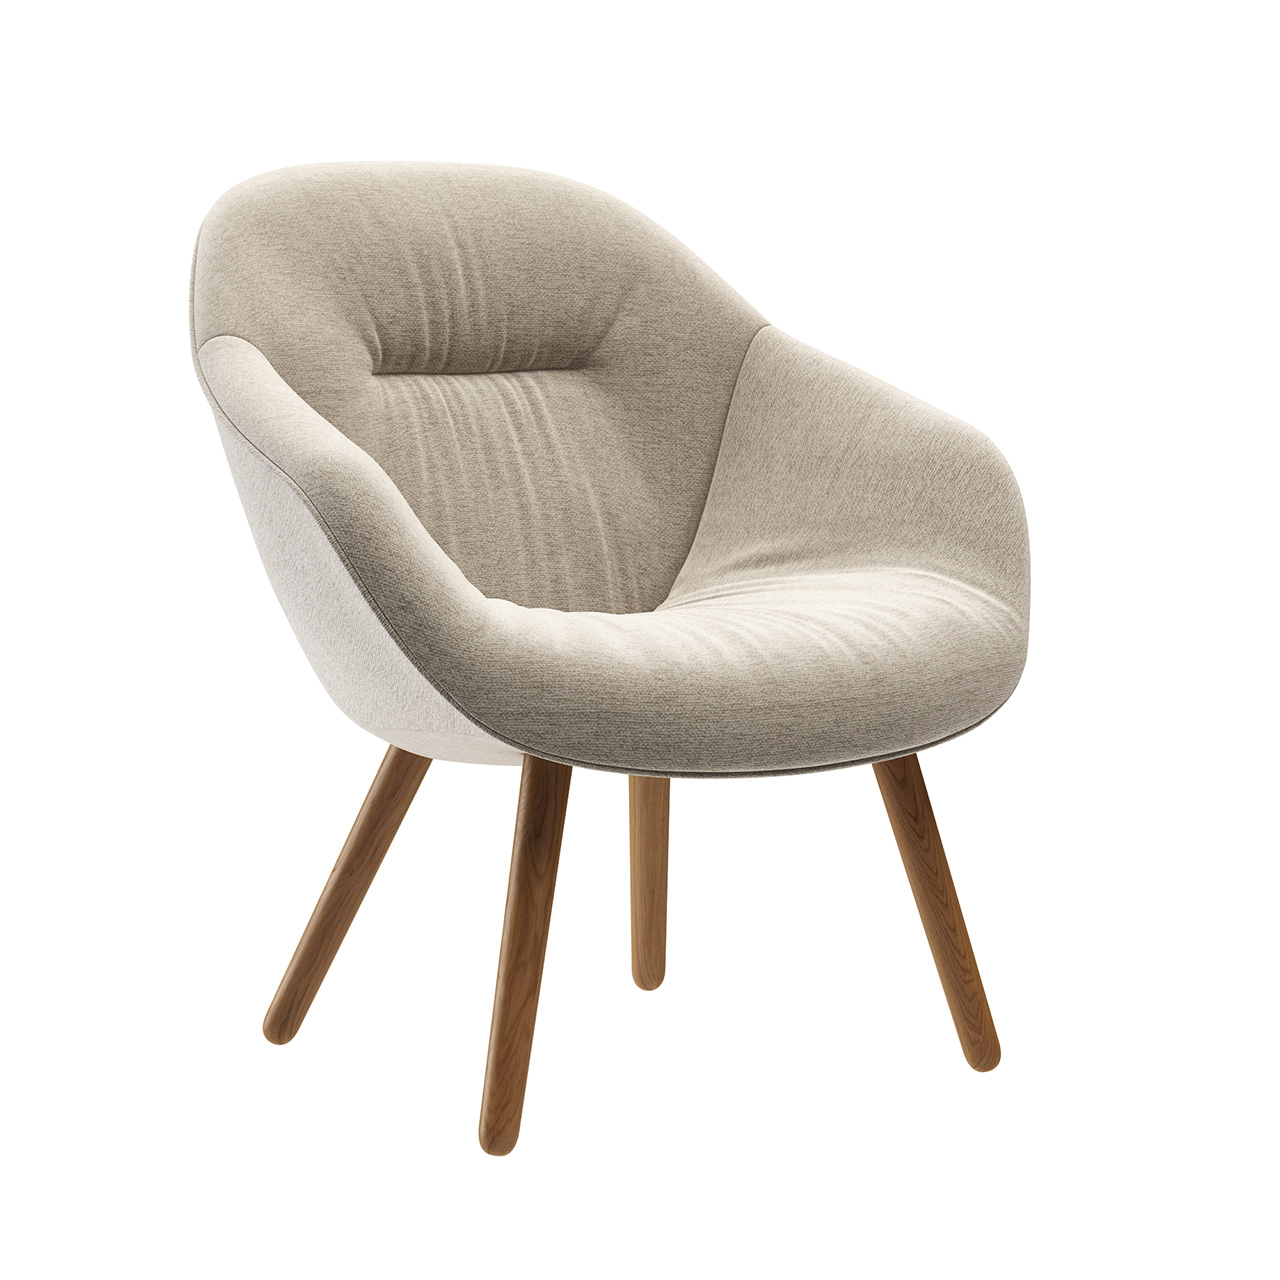 Aal 82 Soft Lounge Chair by Hay